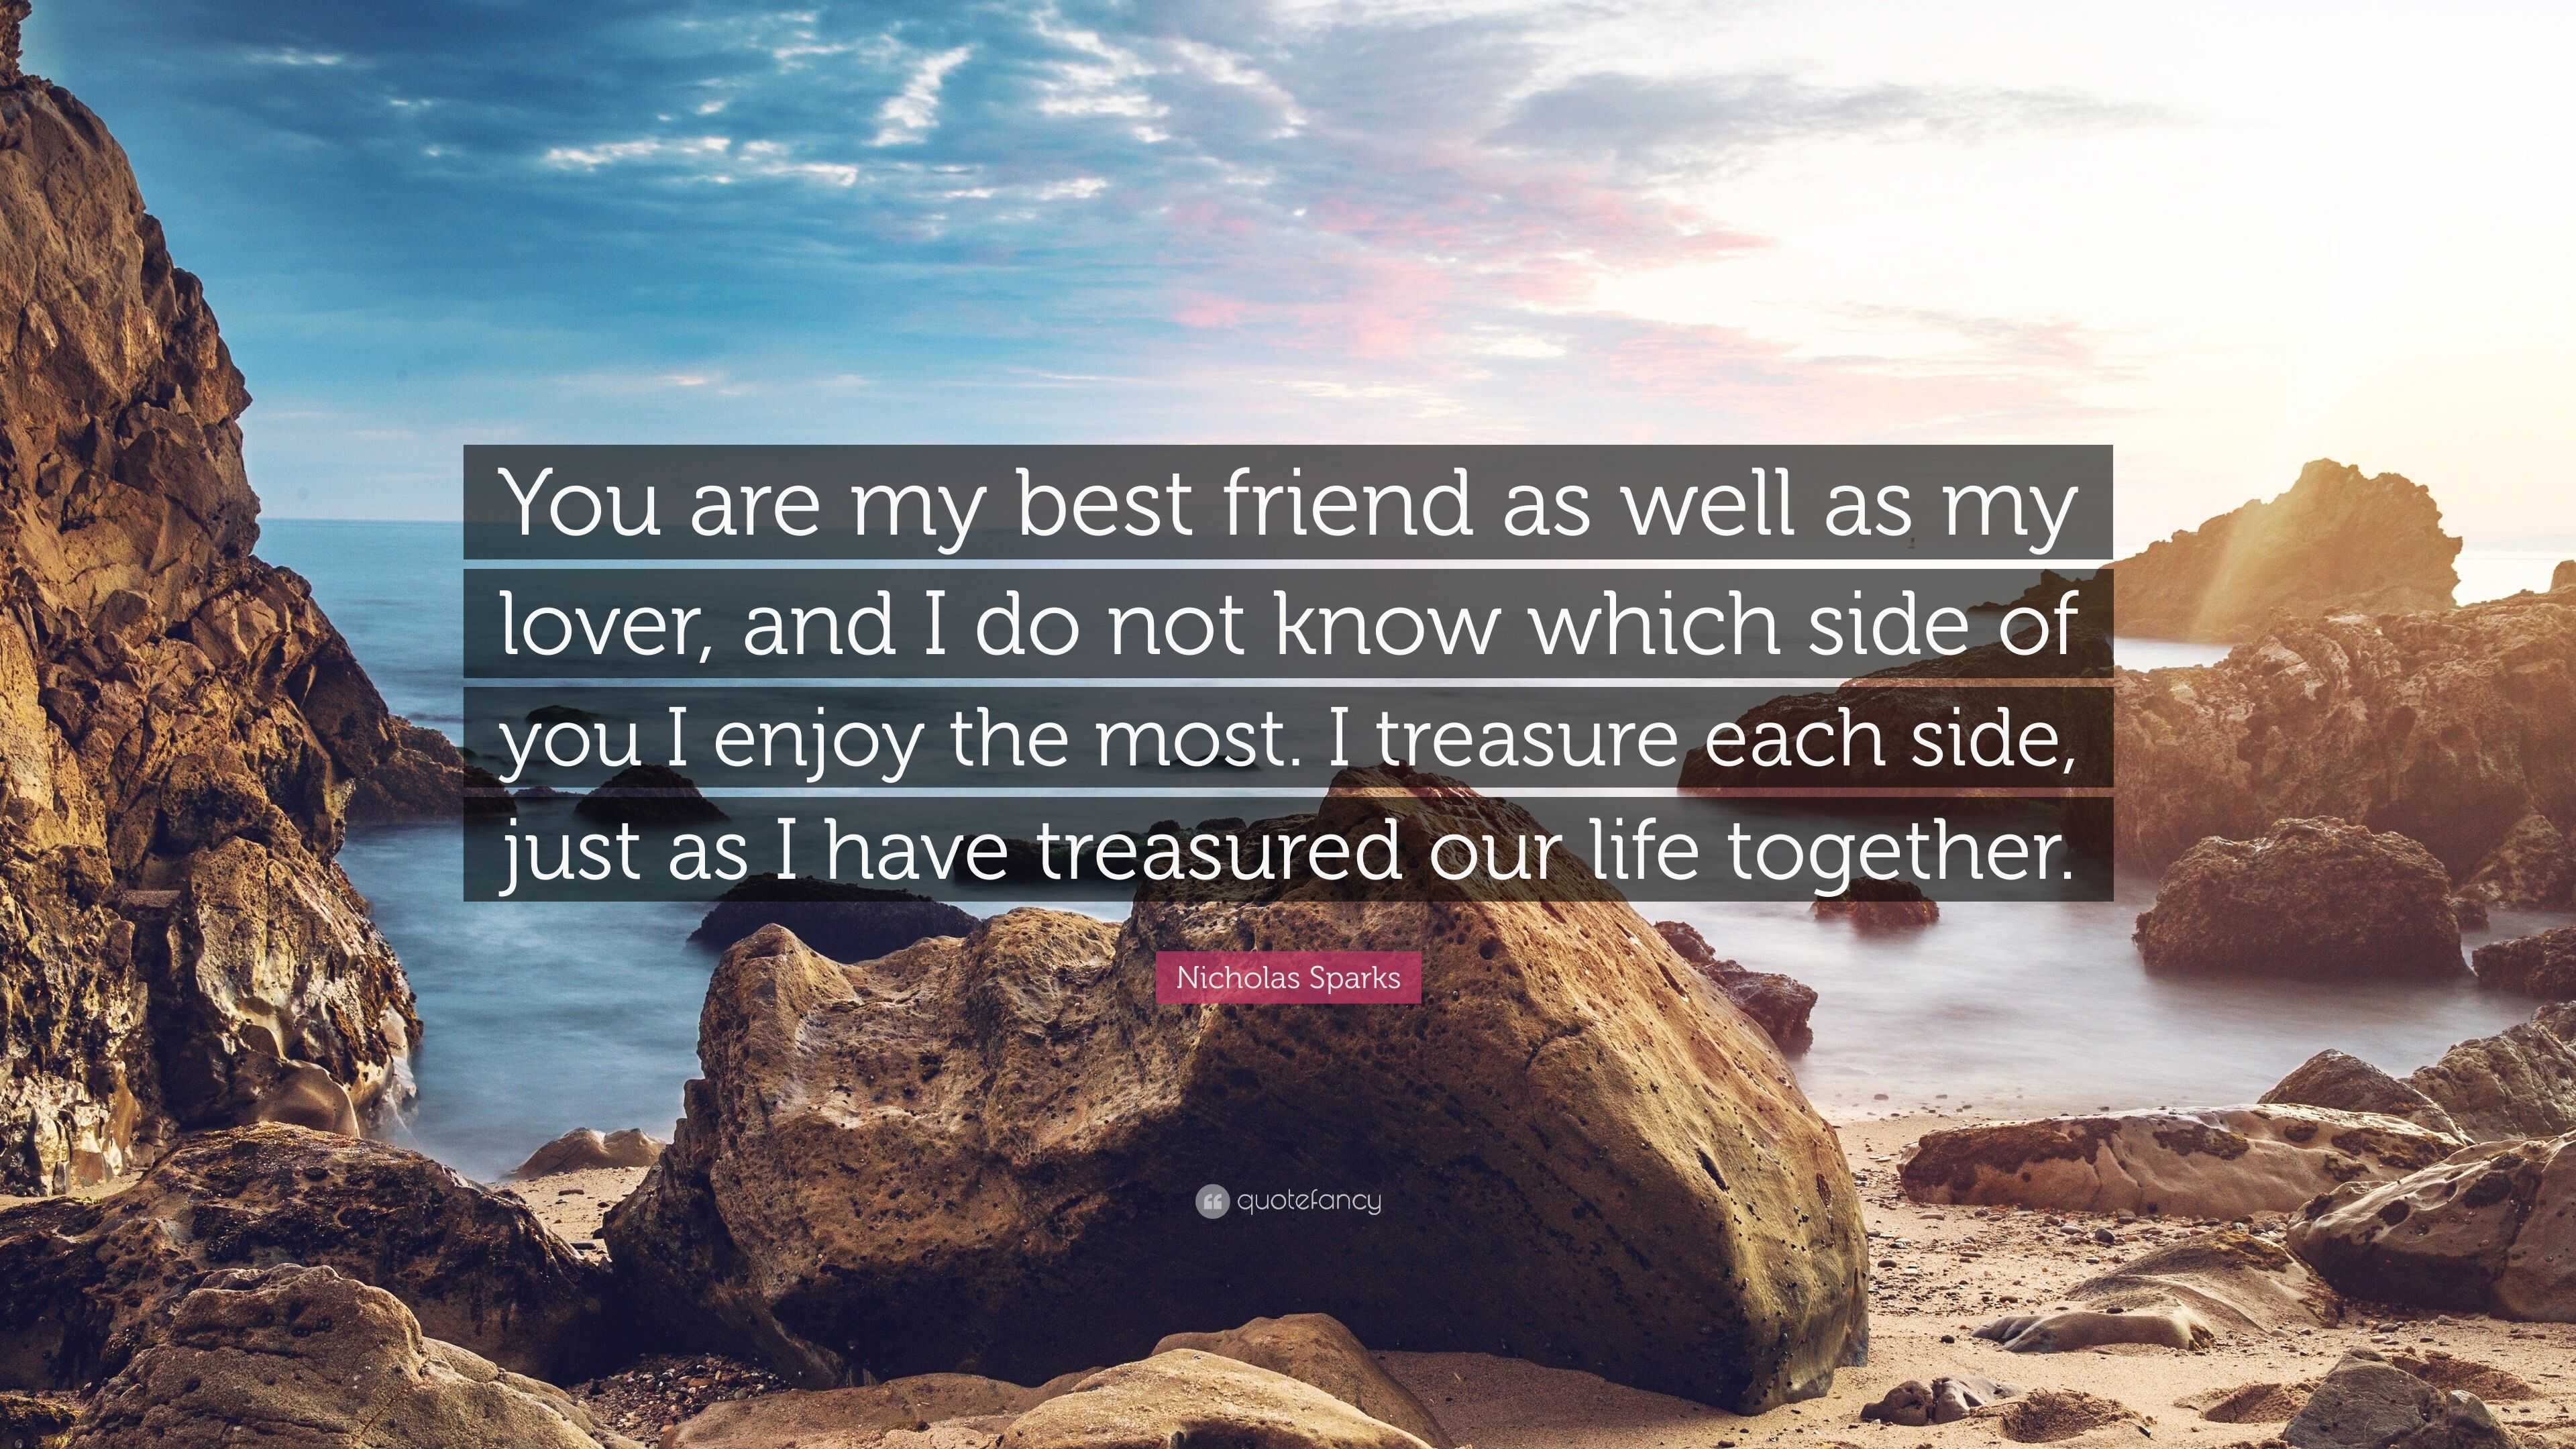 https://quotefancy.com/media/wallpaper/3840x2160/2264654-Nicholas-Sparks-Quote-You-are-my-best-friend-as-well-as-my-lover.jpg